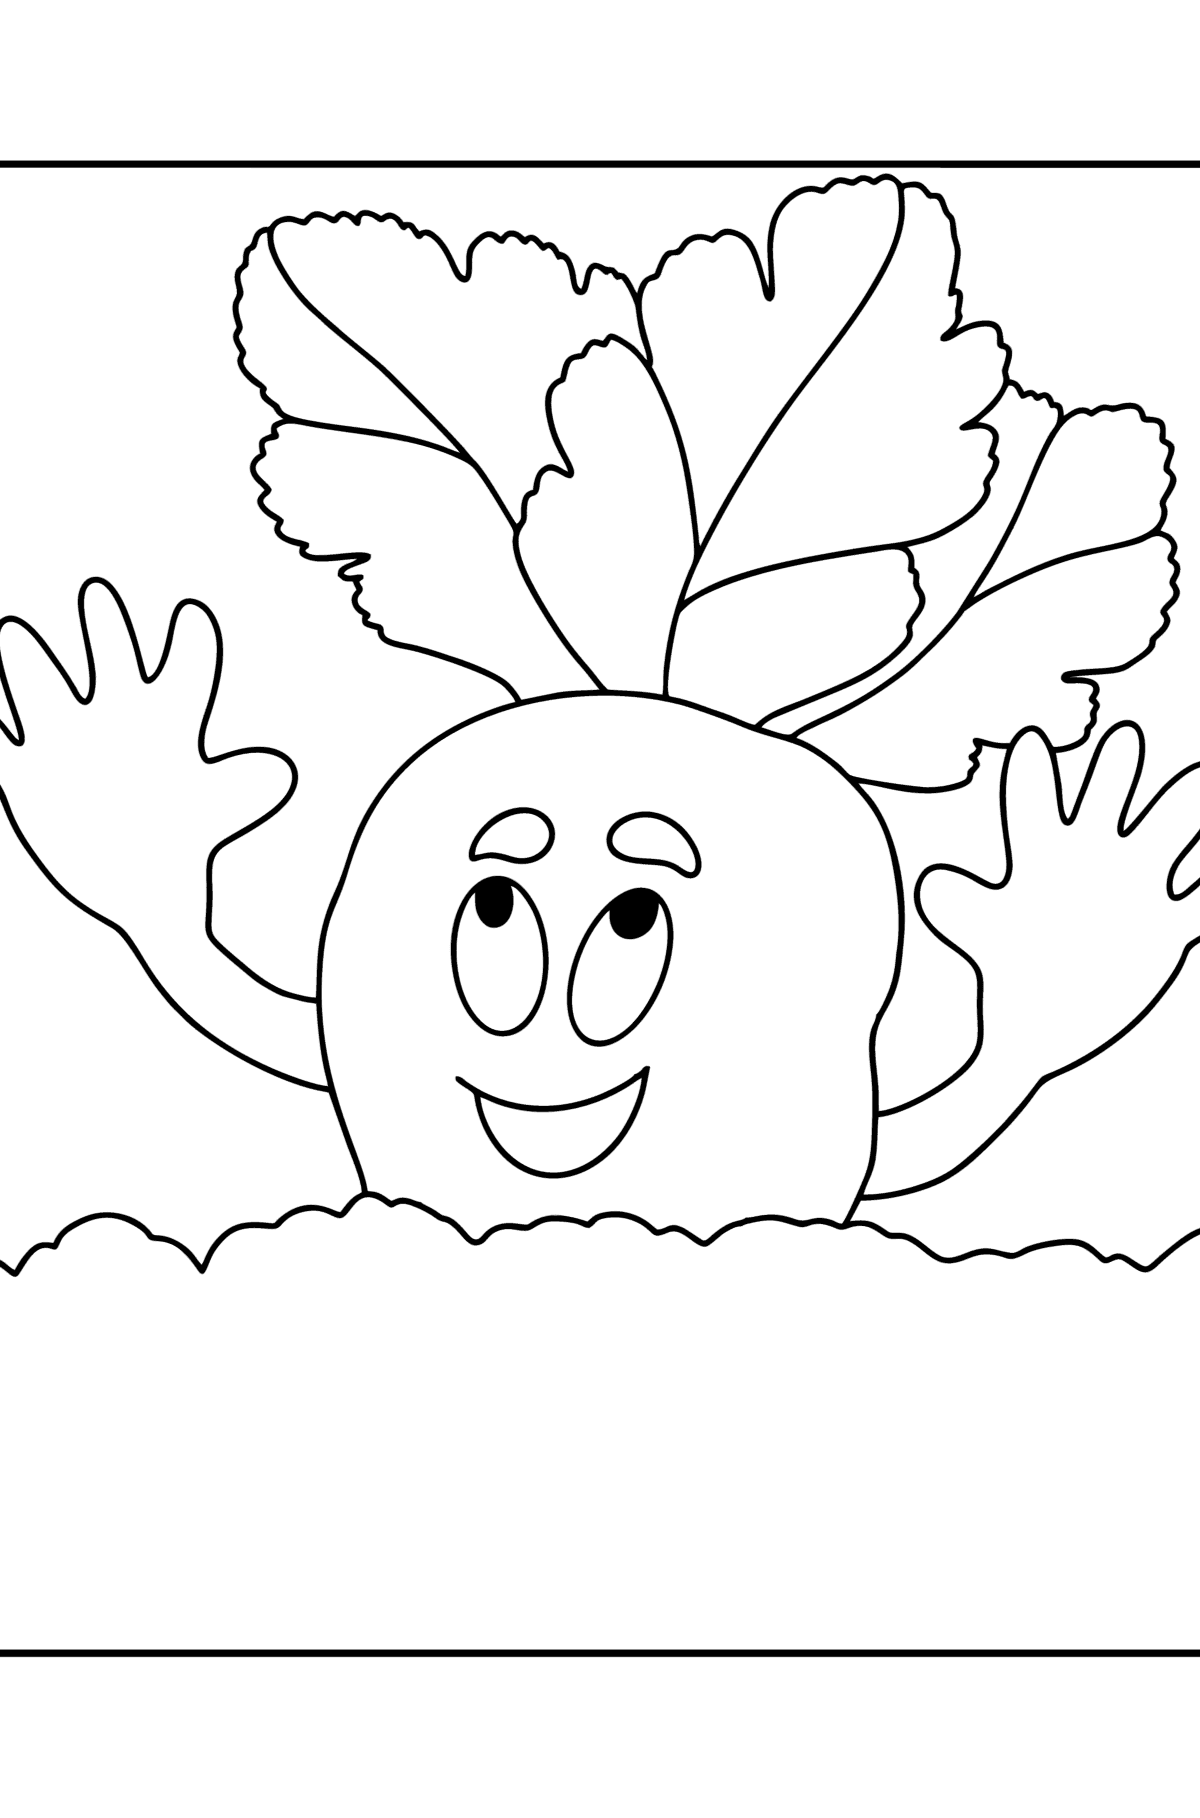 Cute carrot сoloring page - Coloring Pages for Kids